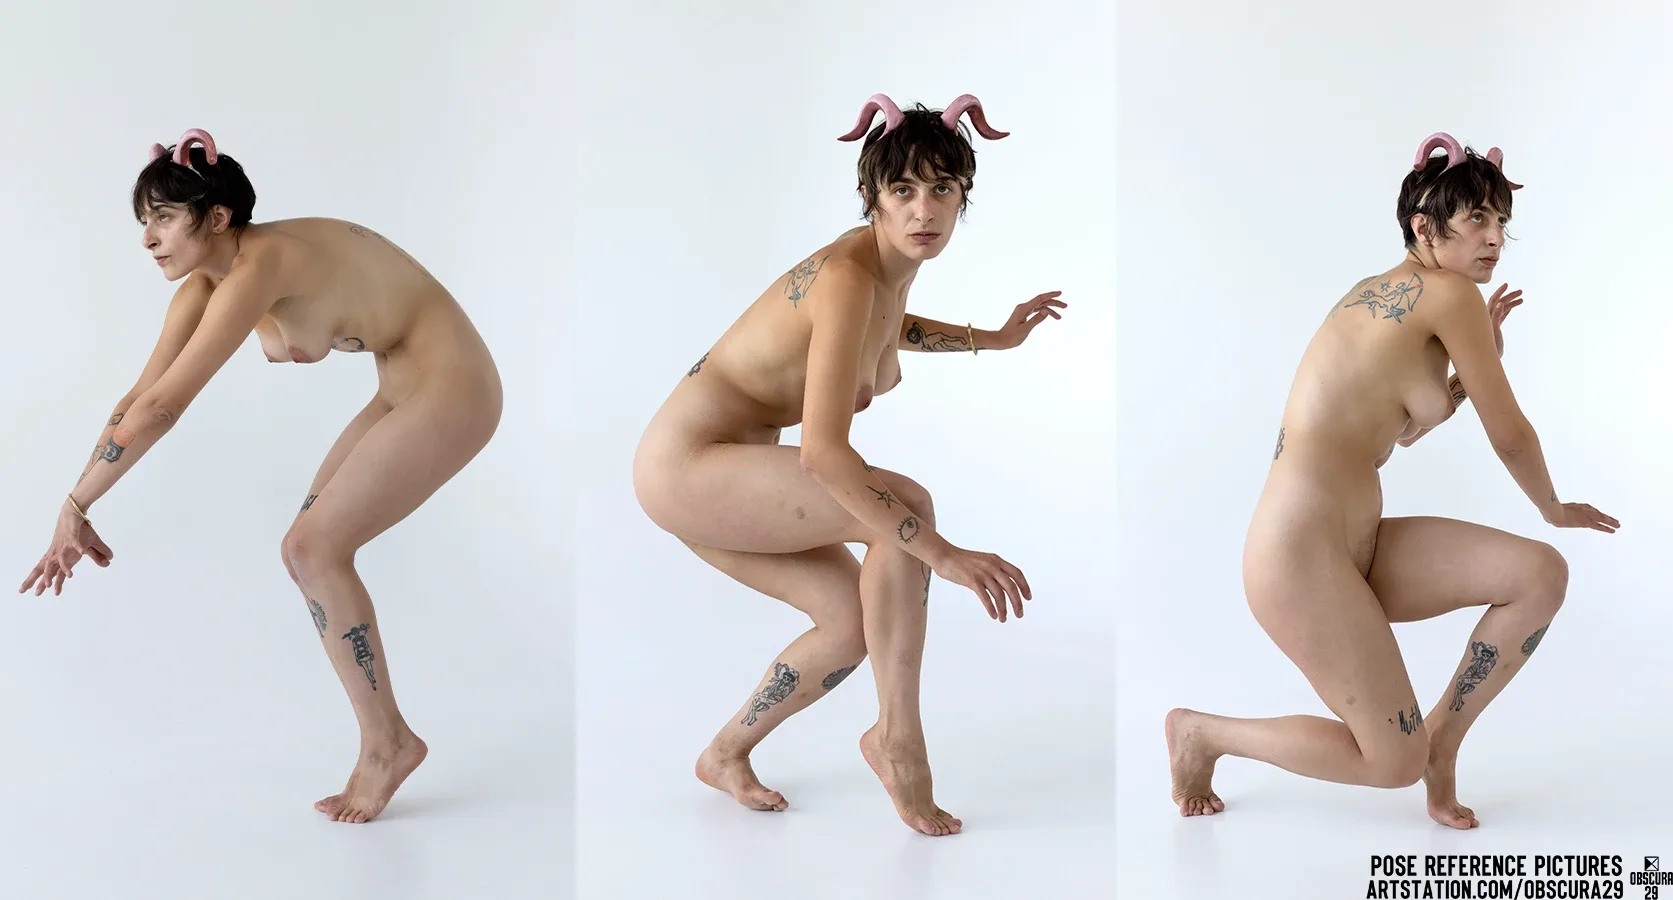 420 Female Faun Poses Reference Pictures